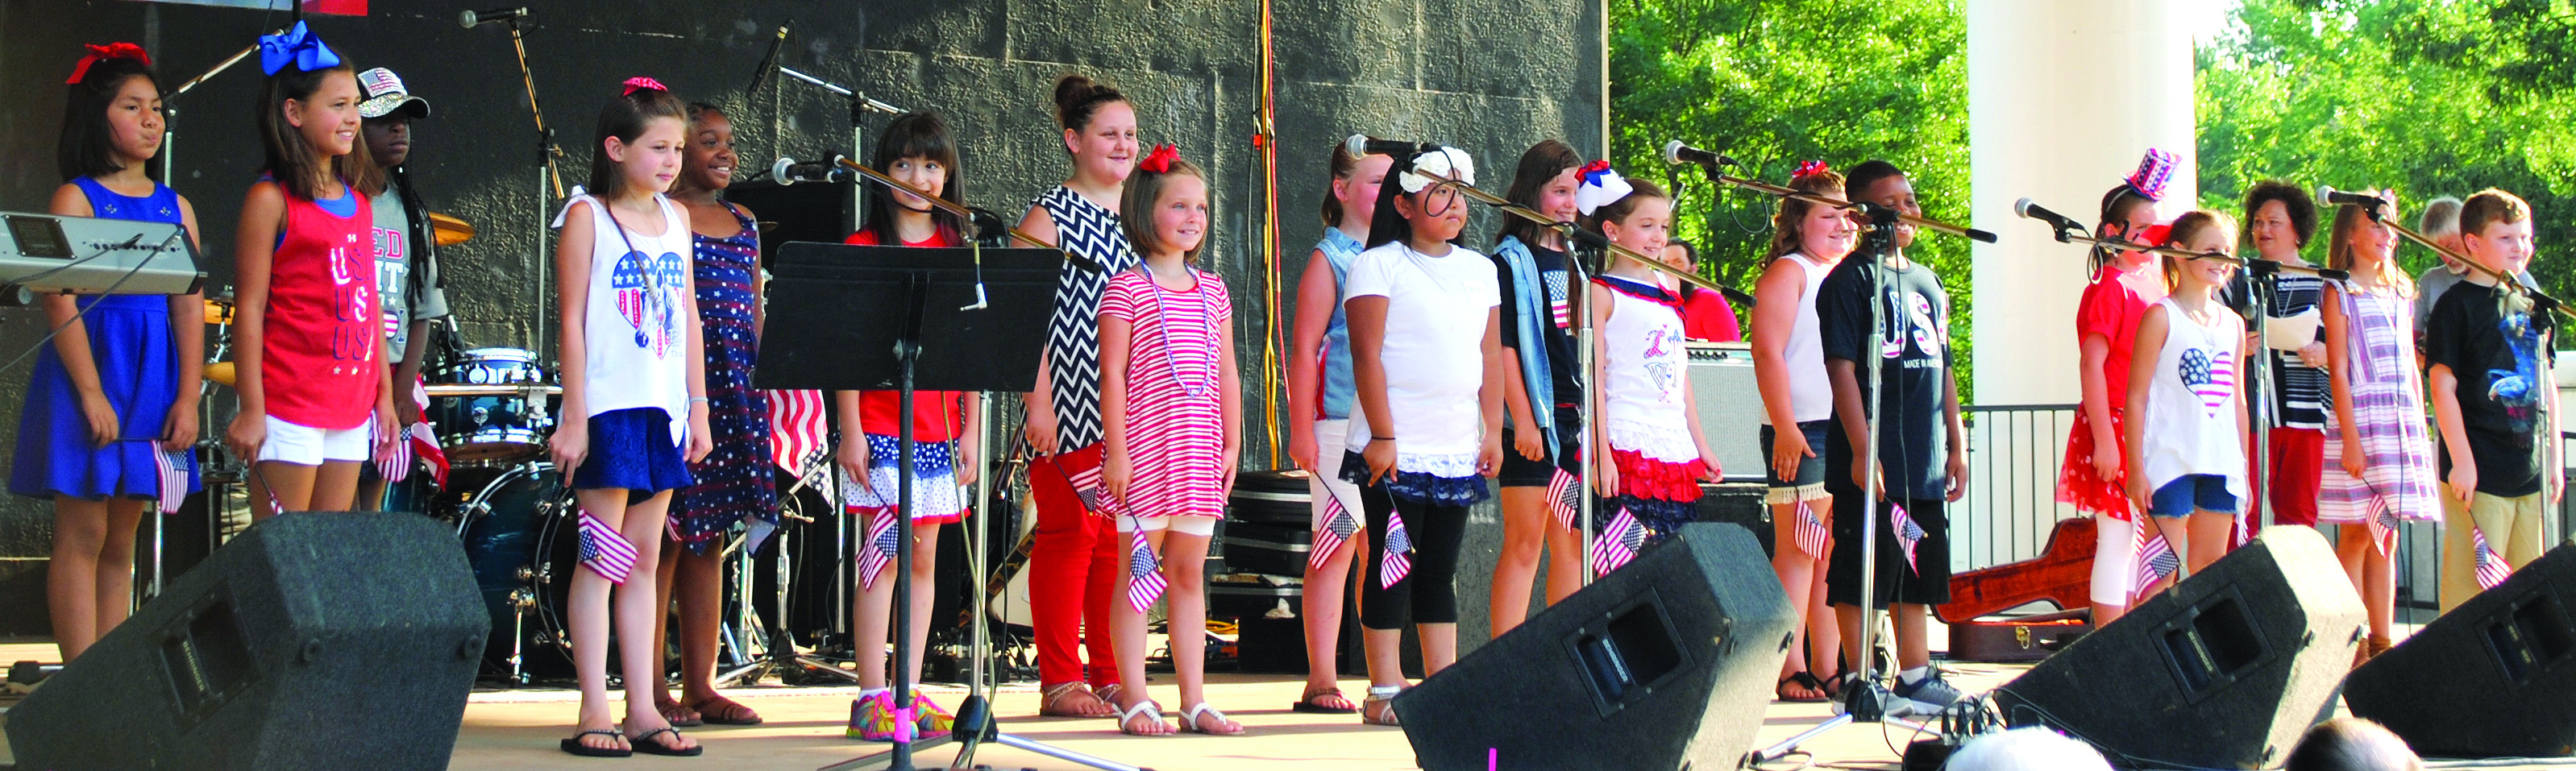 Nashville Primary School students directed by Stacia Petty sing “Battle Cry of Freedom” Saturday during Stand Up for America. The patriotic celebration attracted hundreds to the Nashville City Park.